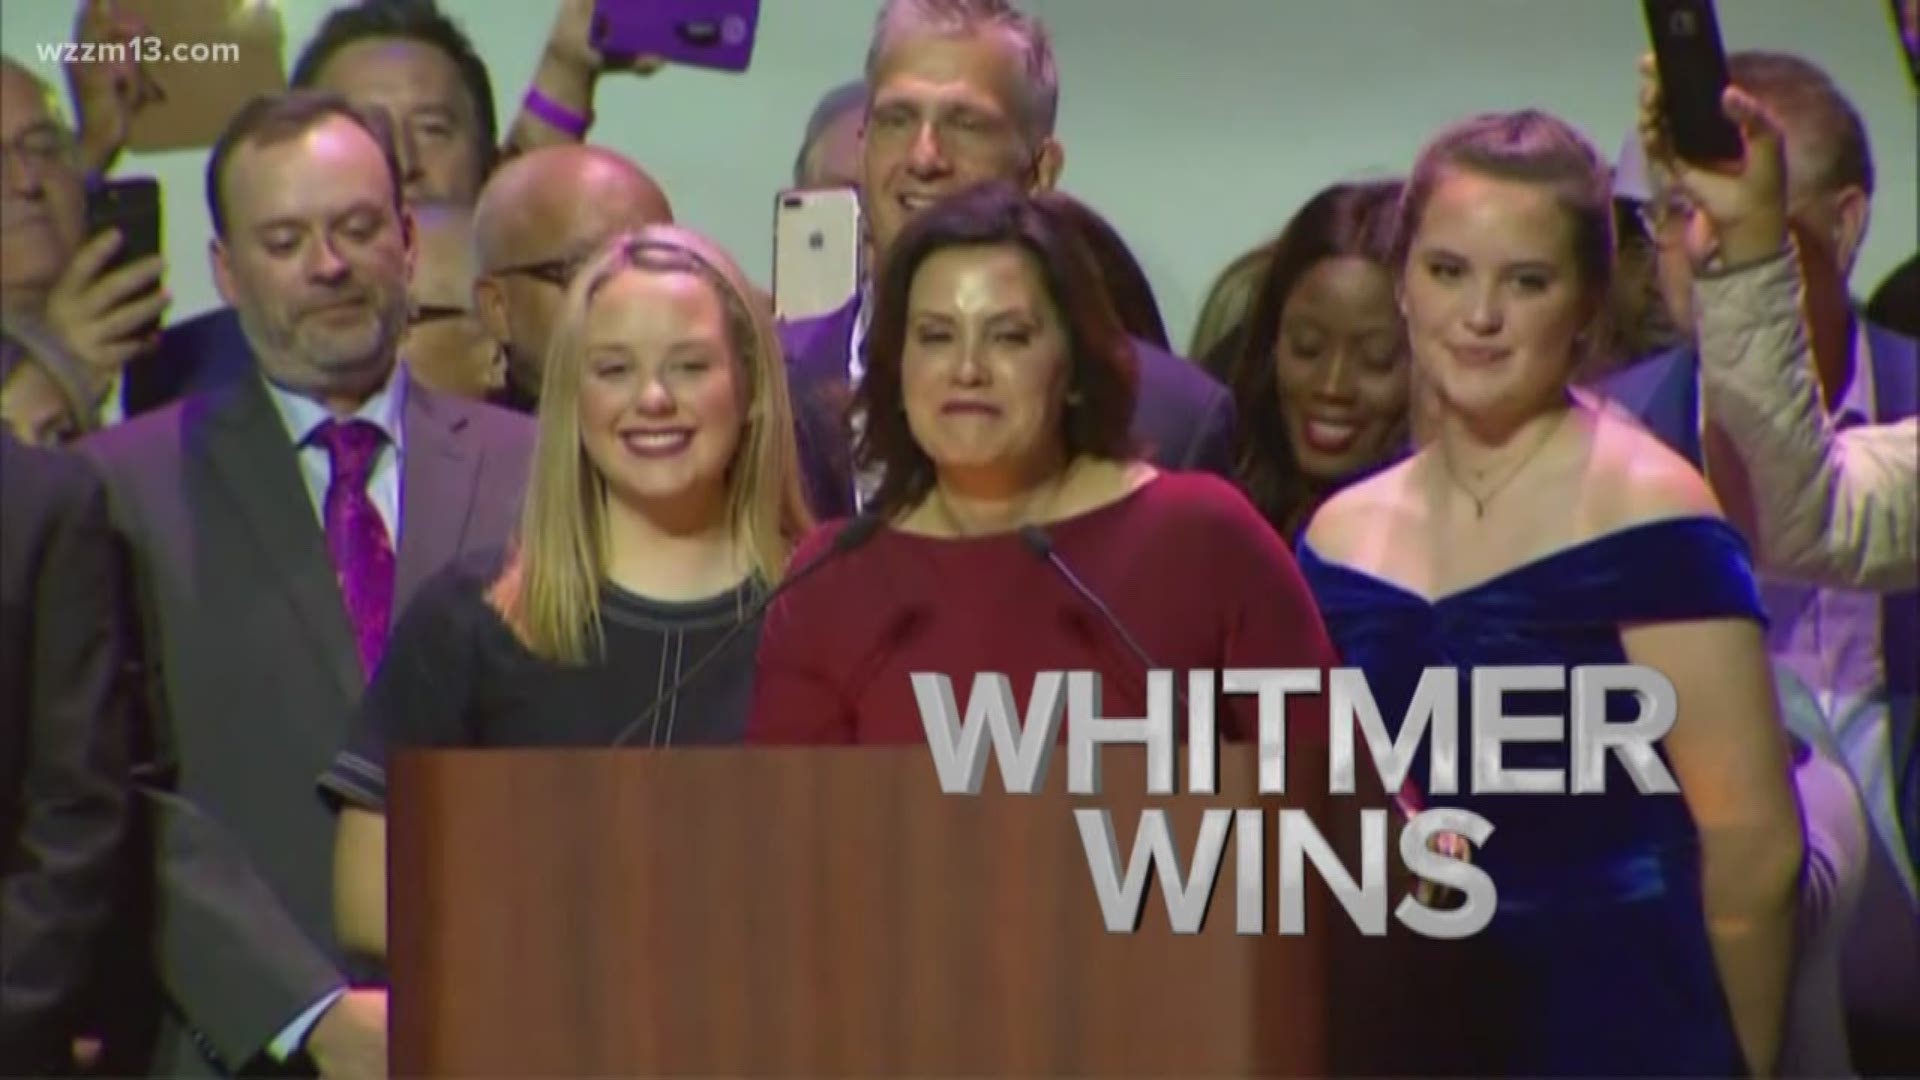 Whitmer defeats Schuette in governor's race